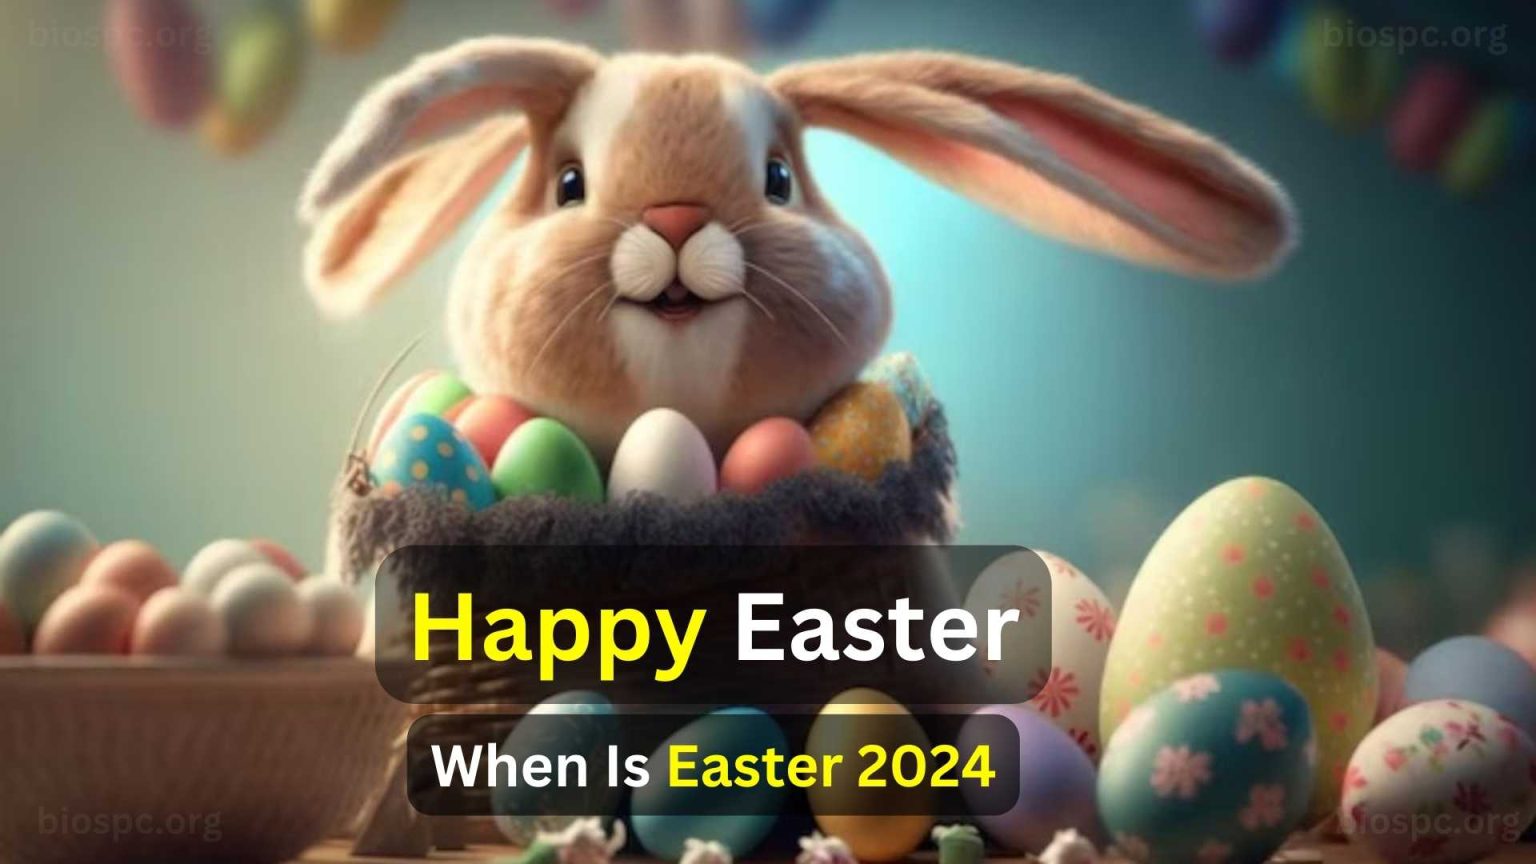 Easter 2024 When Is Easter Holidays 2024? Know Full Information